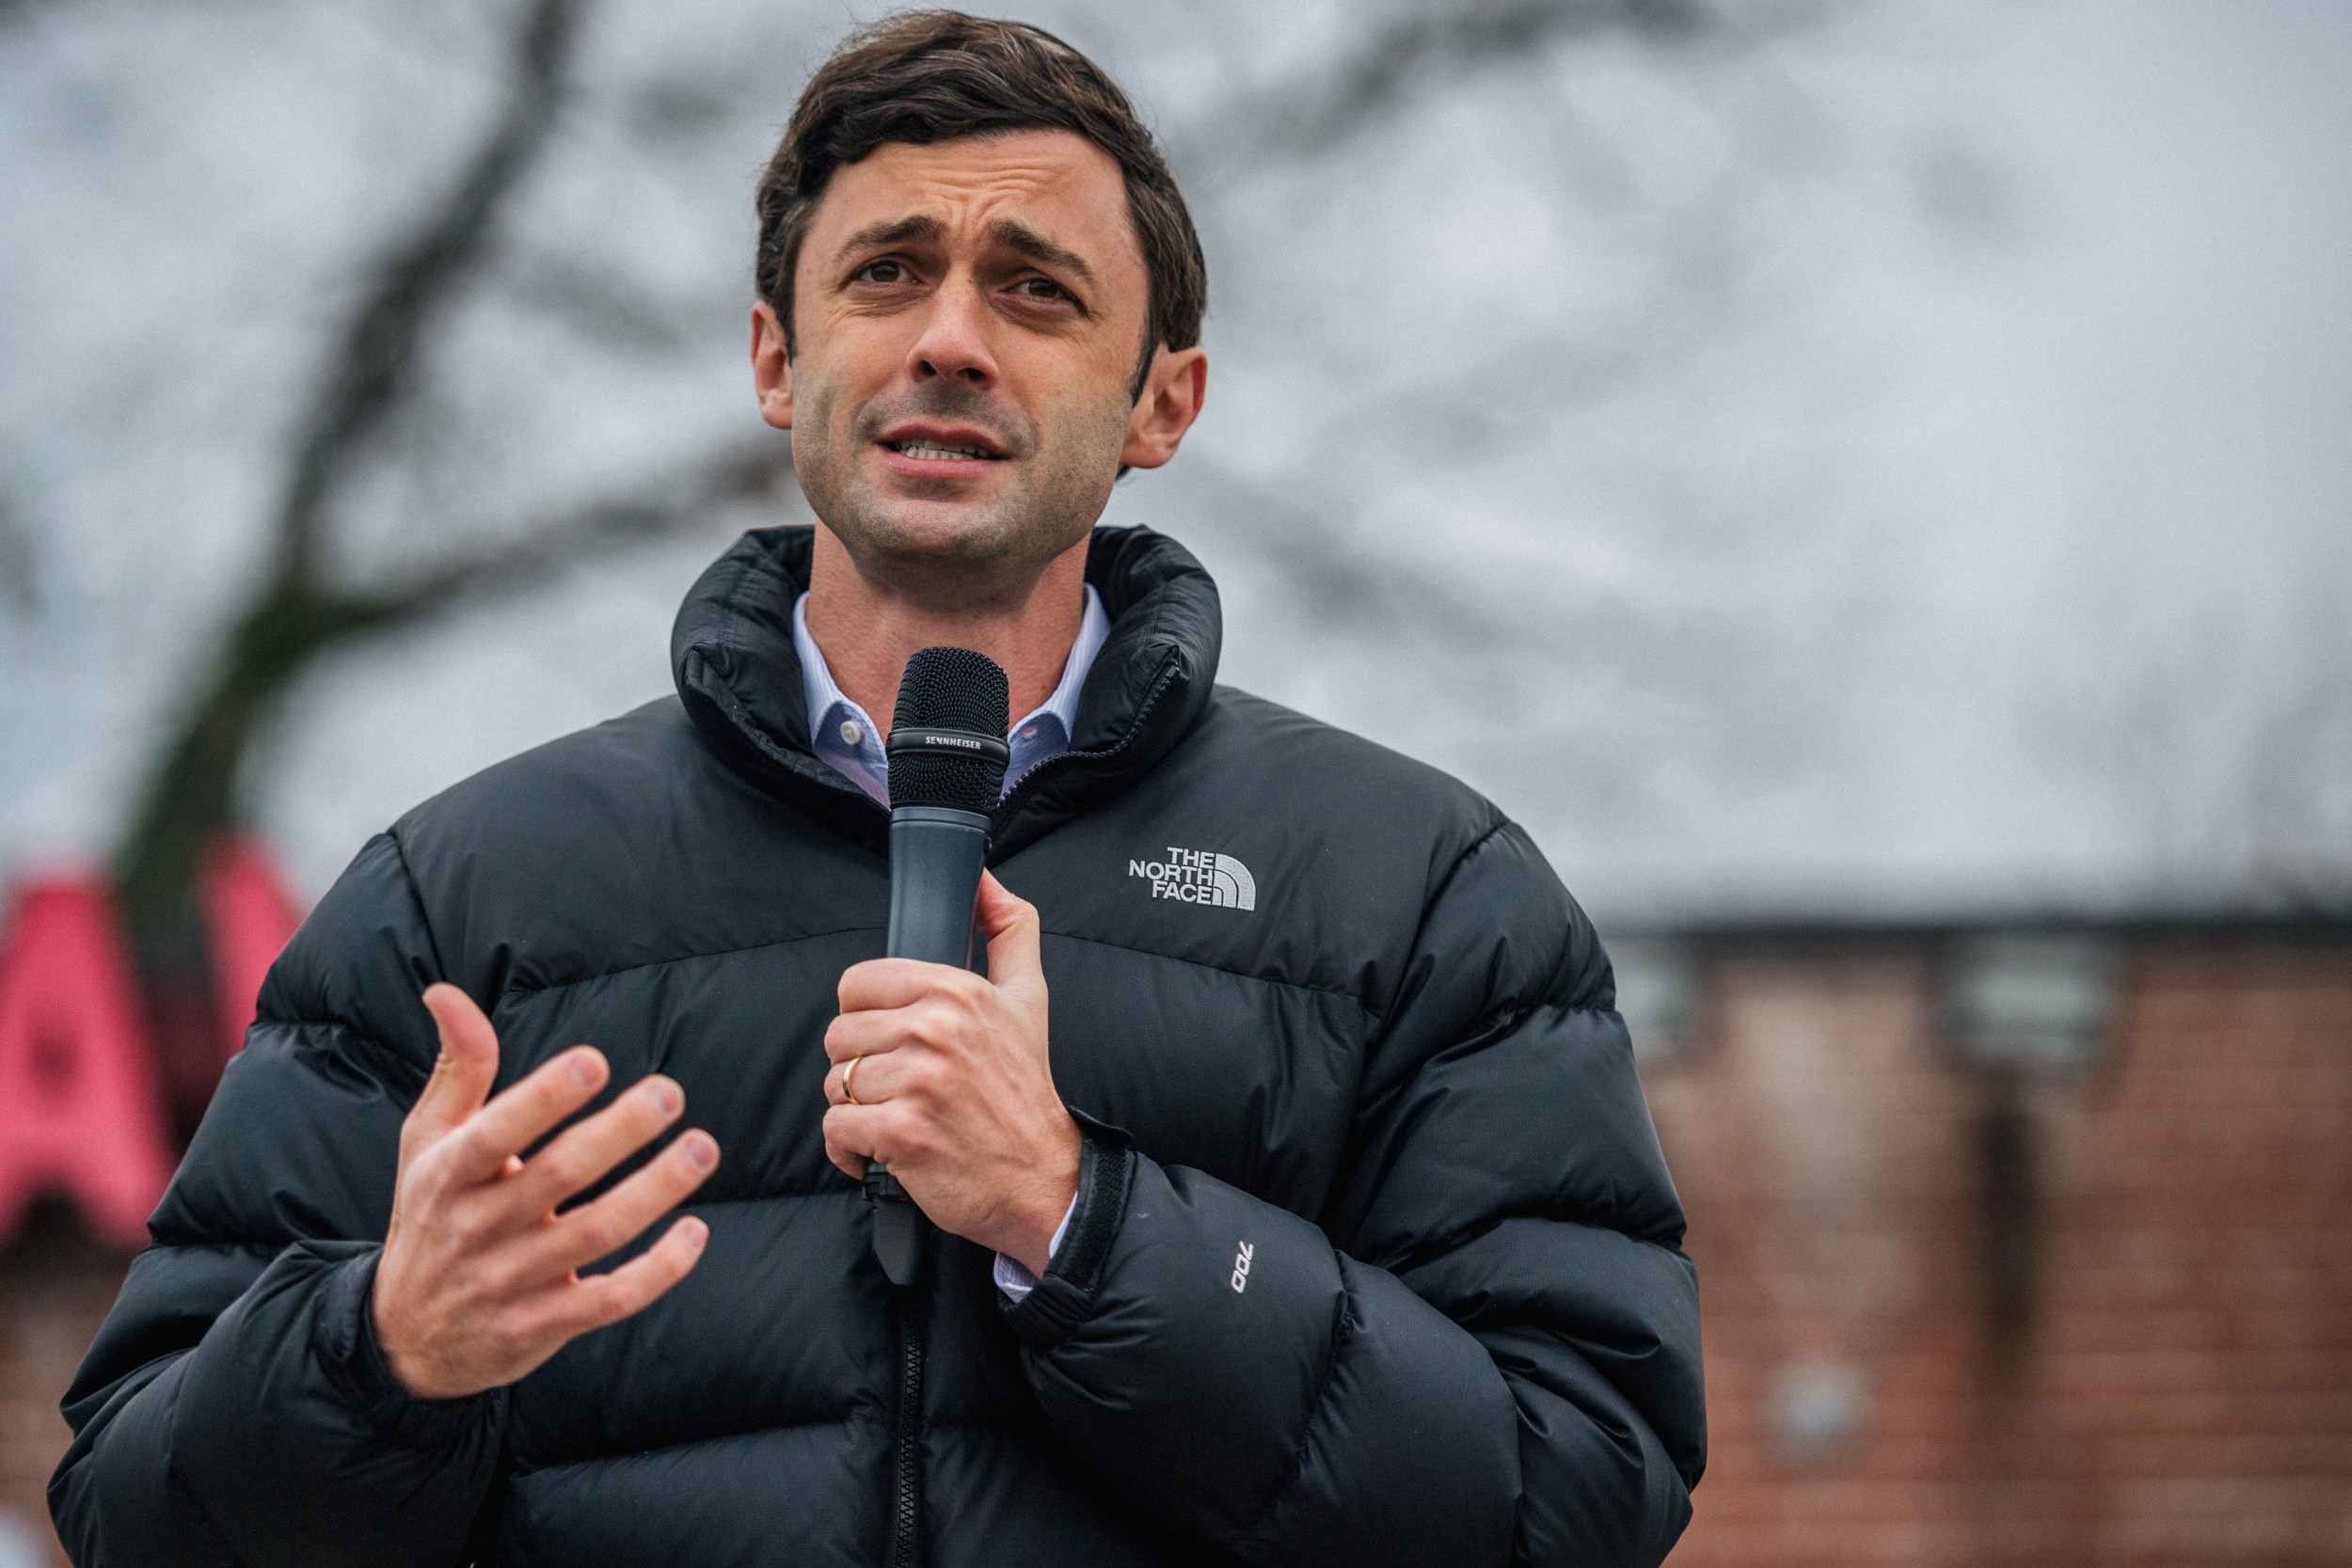 What polls say about David Perdue and Jon Ossoff 4 days before election in Georgia